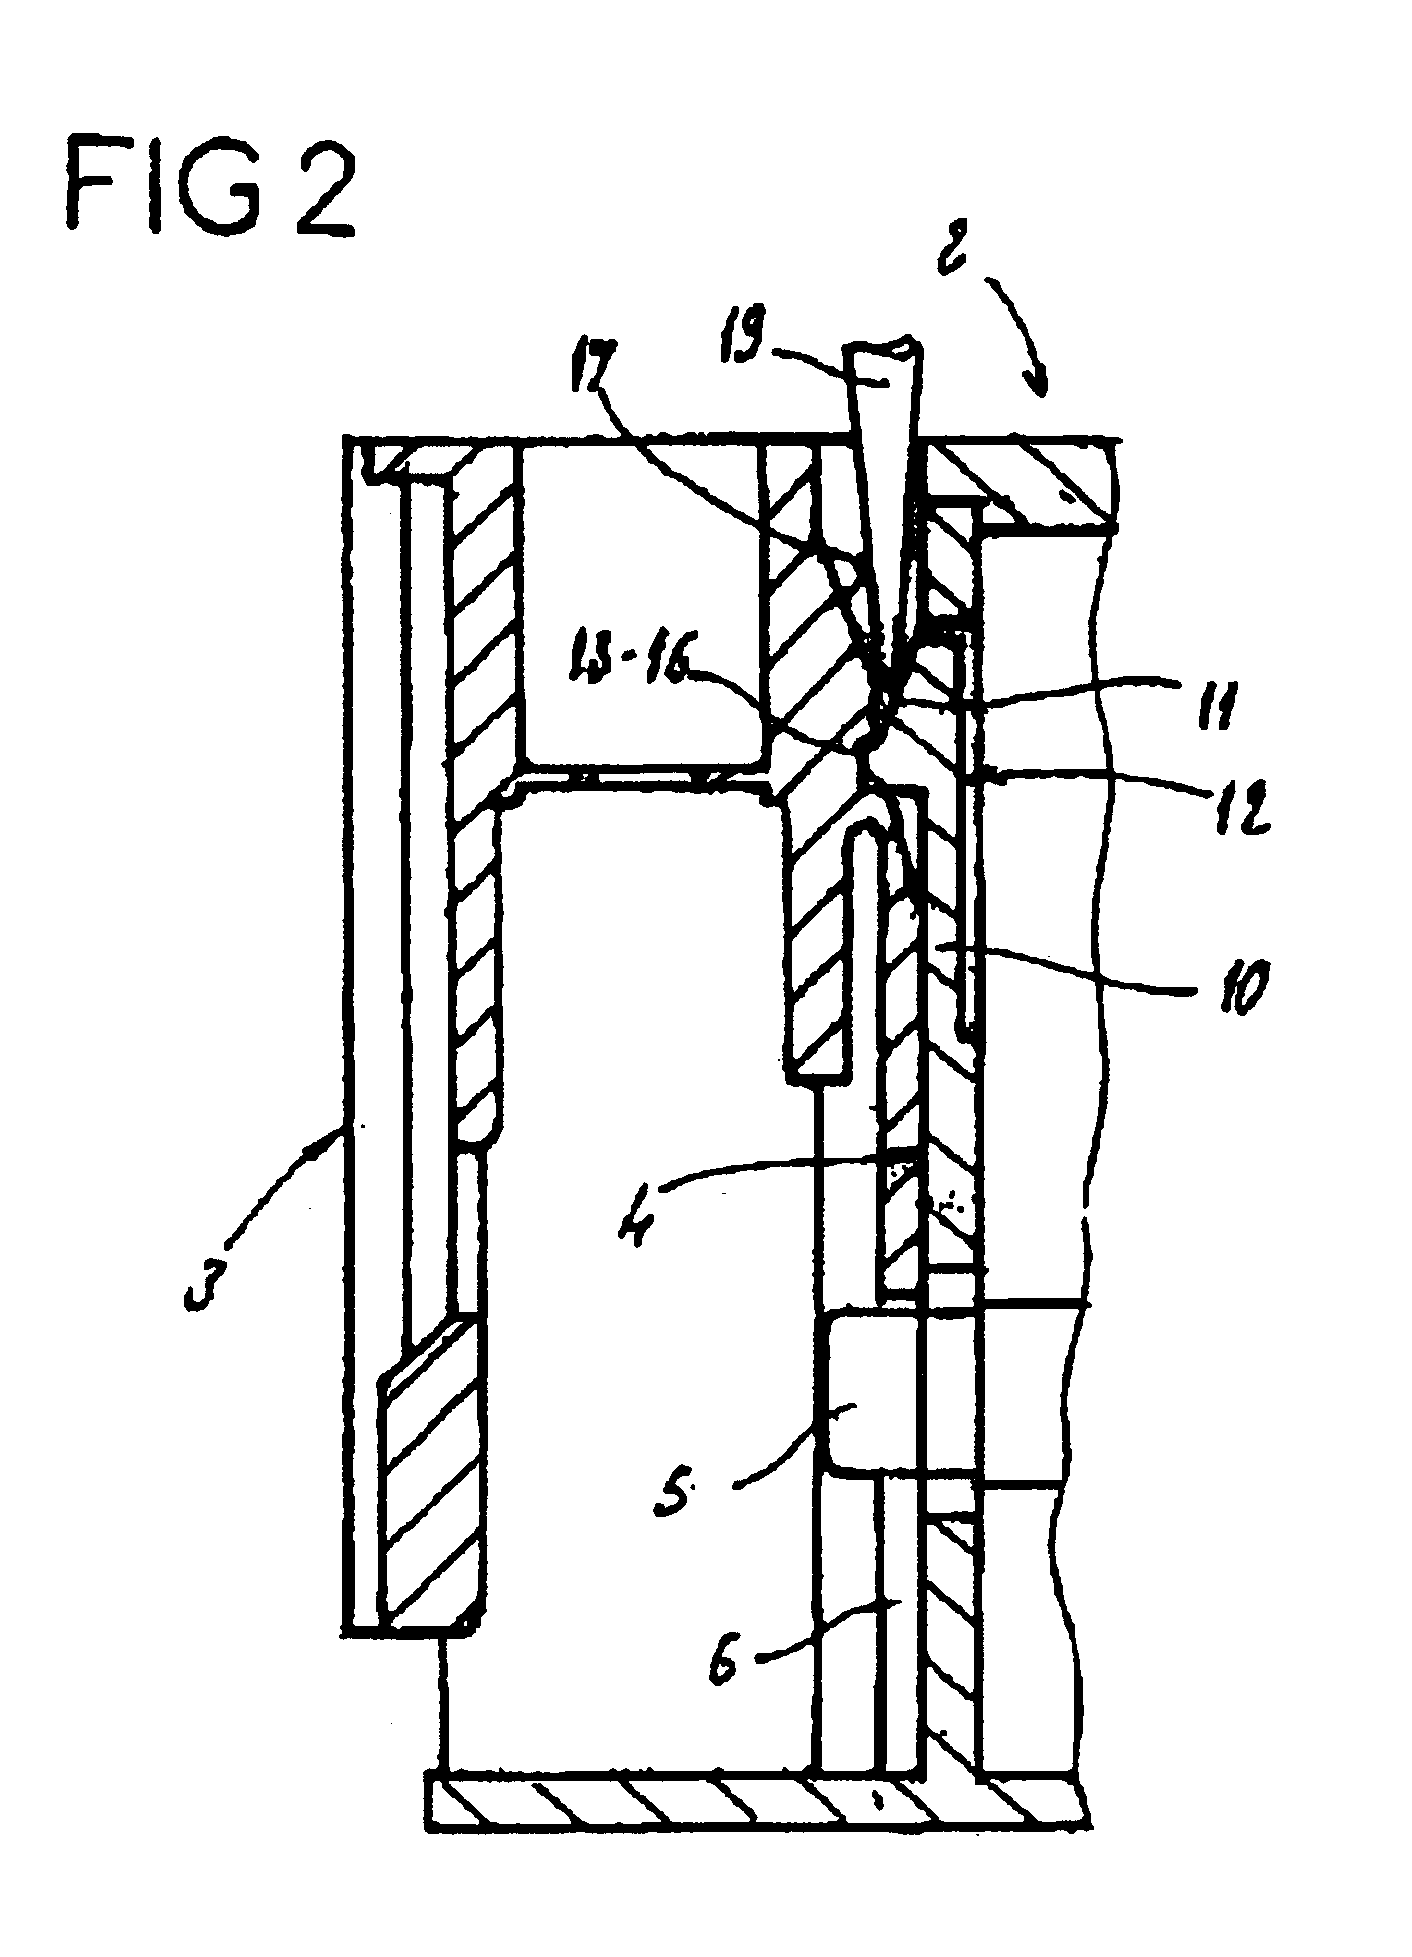 Connection device for an electronic box